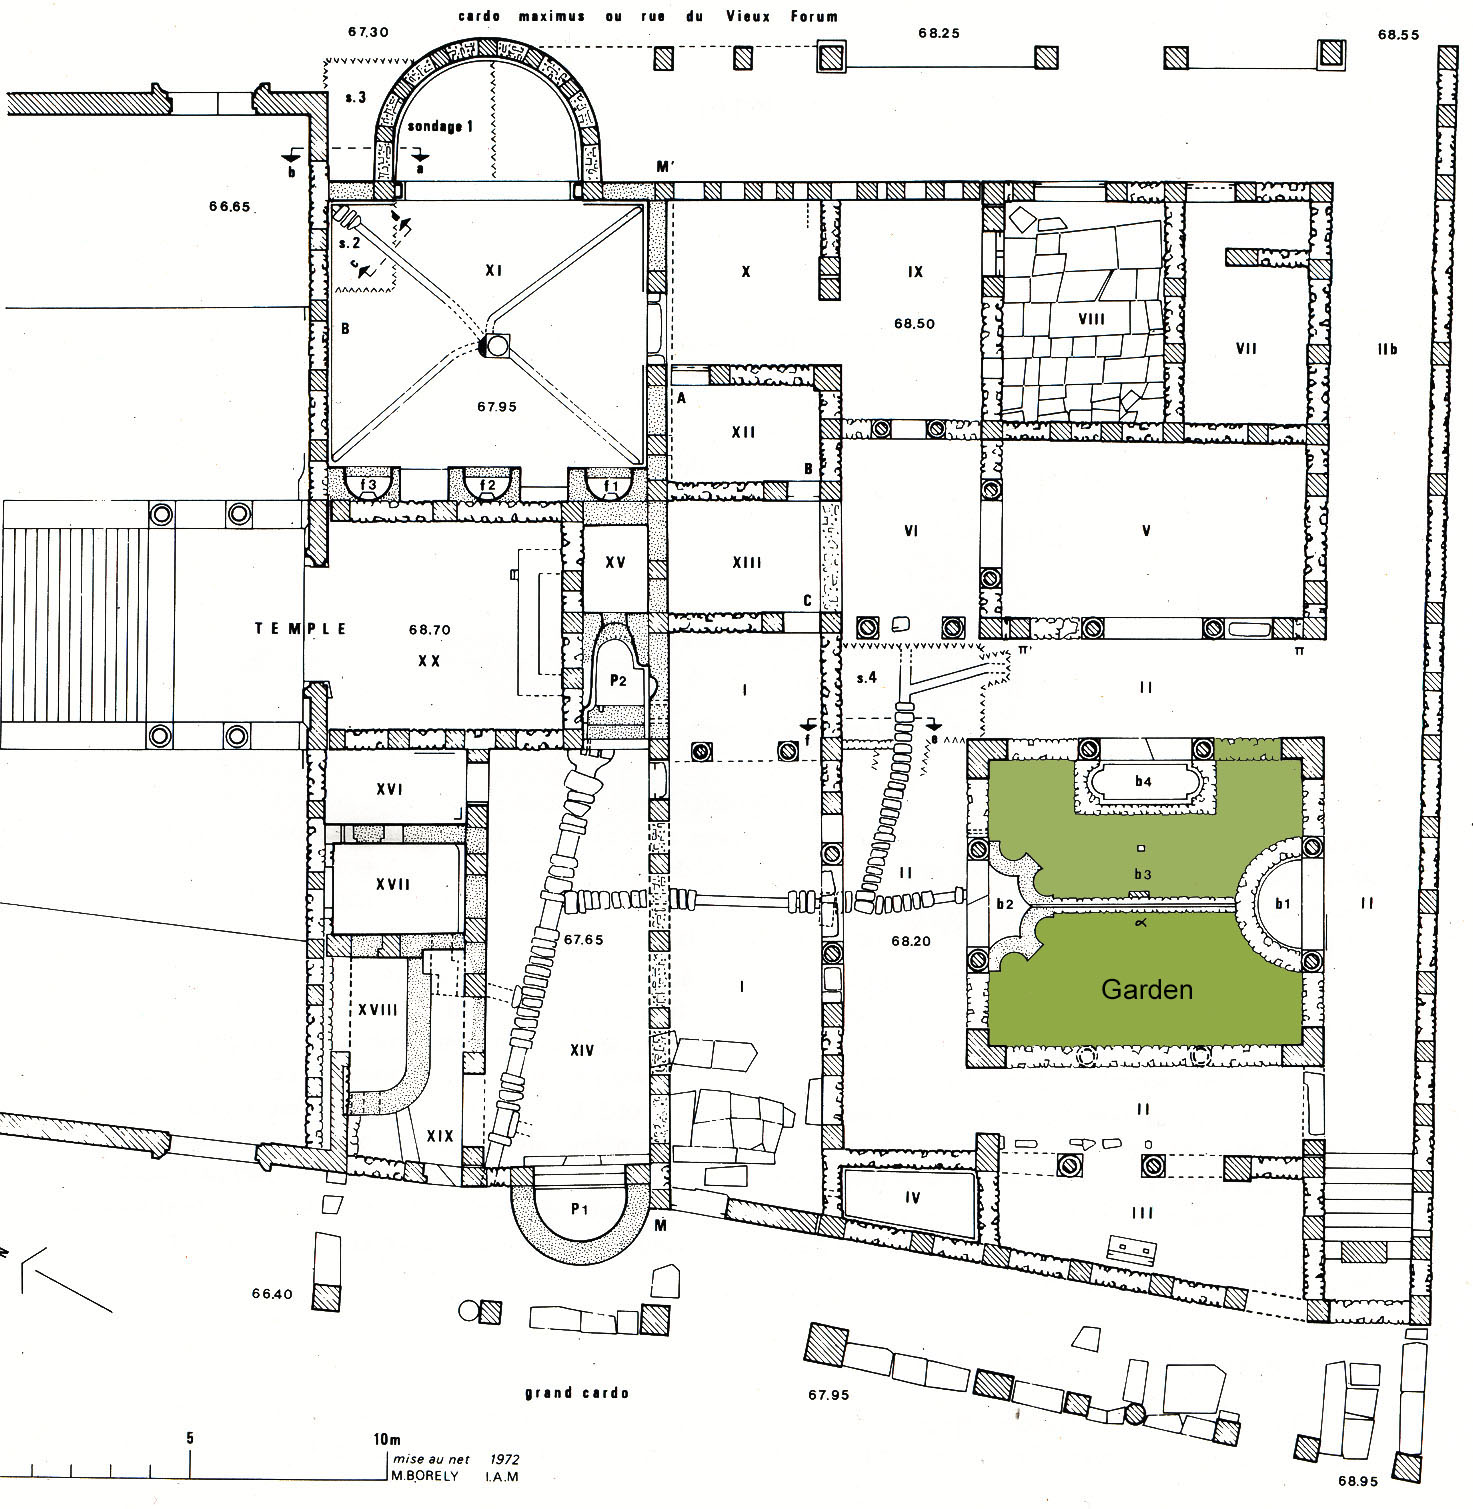 Plan of the House of Asinus Nica.